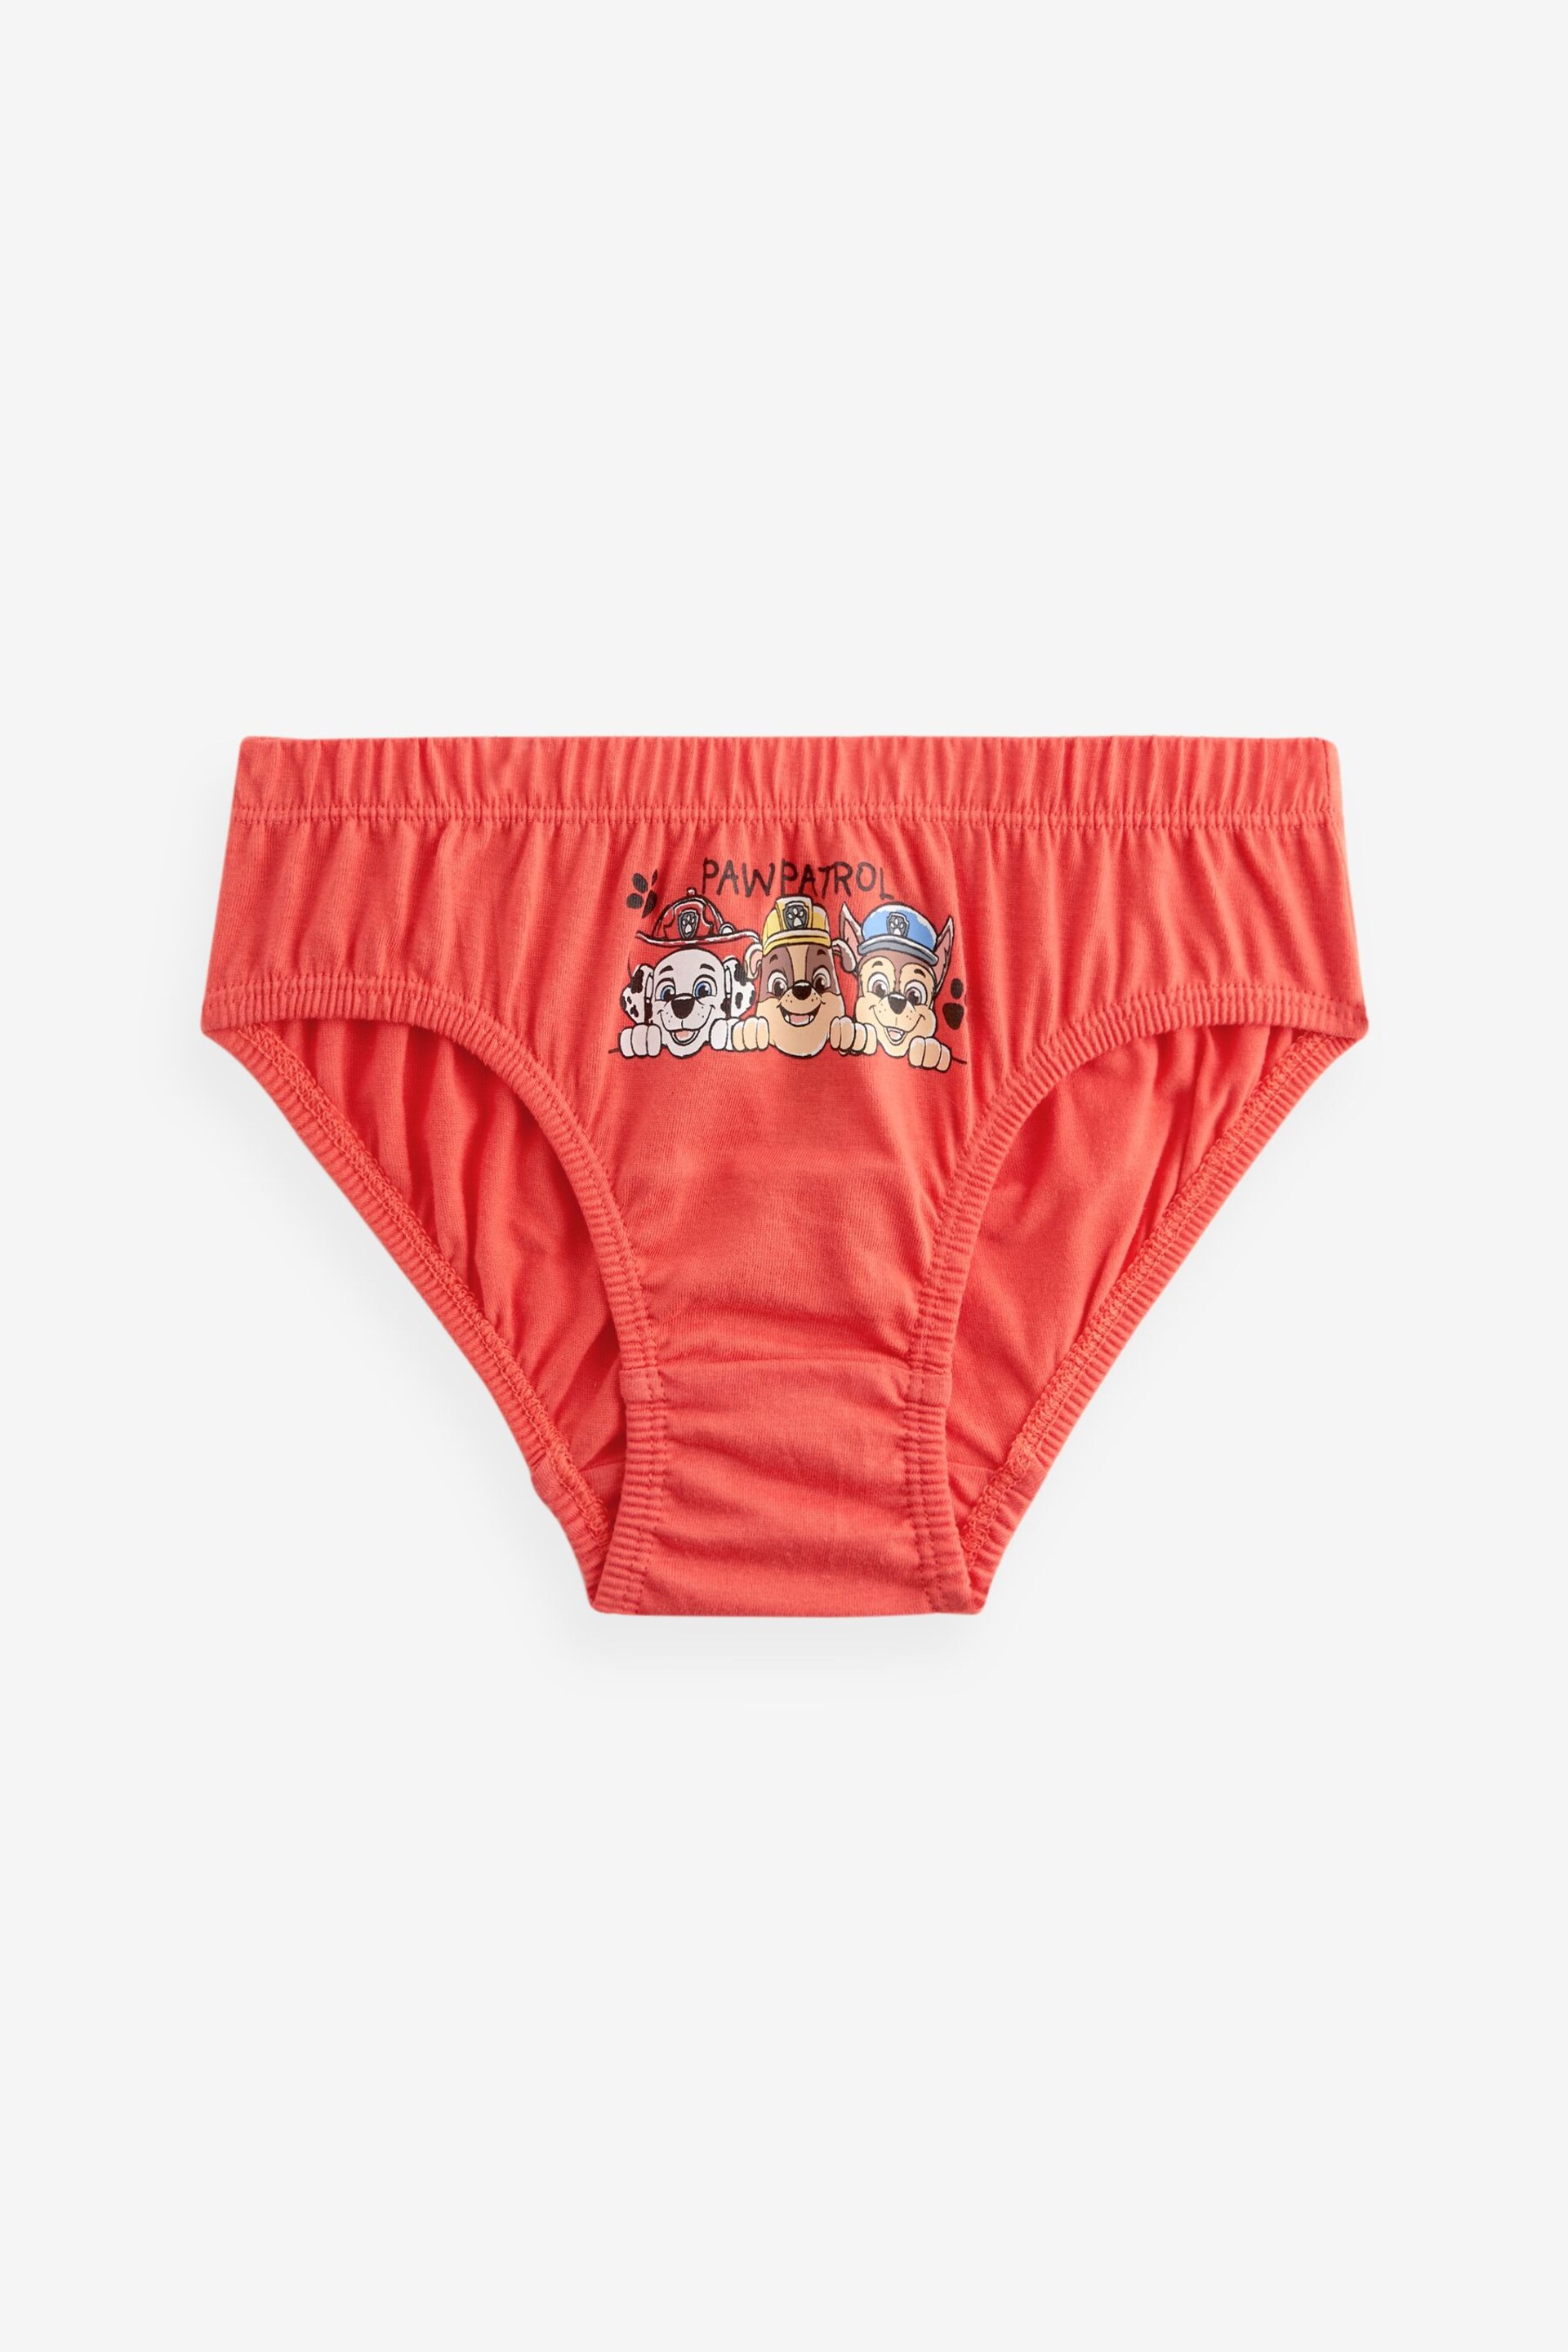 Paw Patrol Briefs 5 Pack (1.5-10yrs) - Image 4 of 8